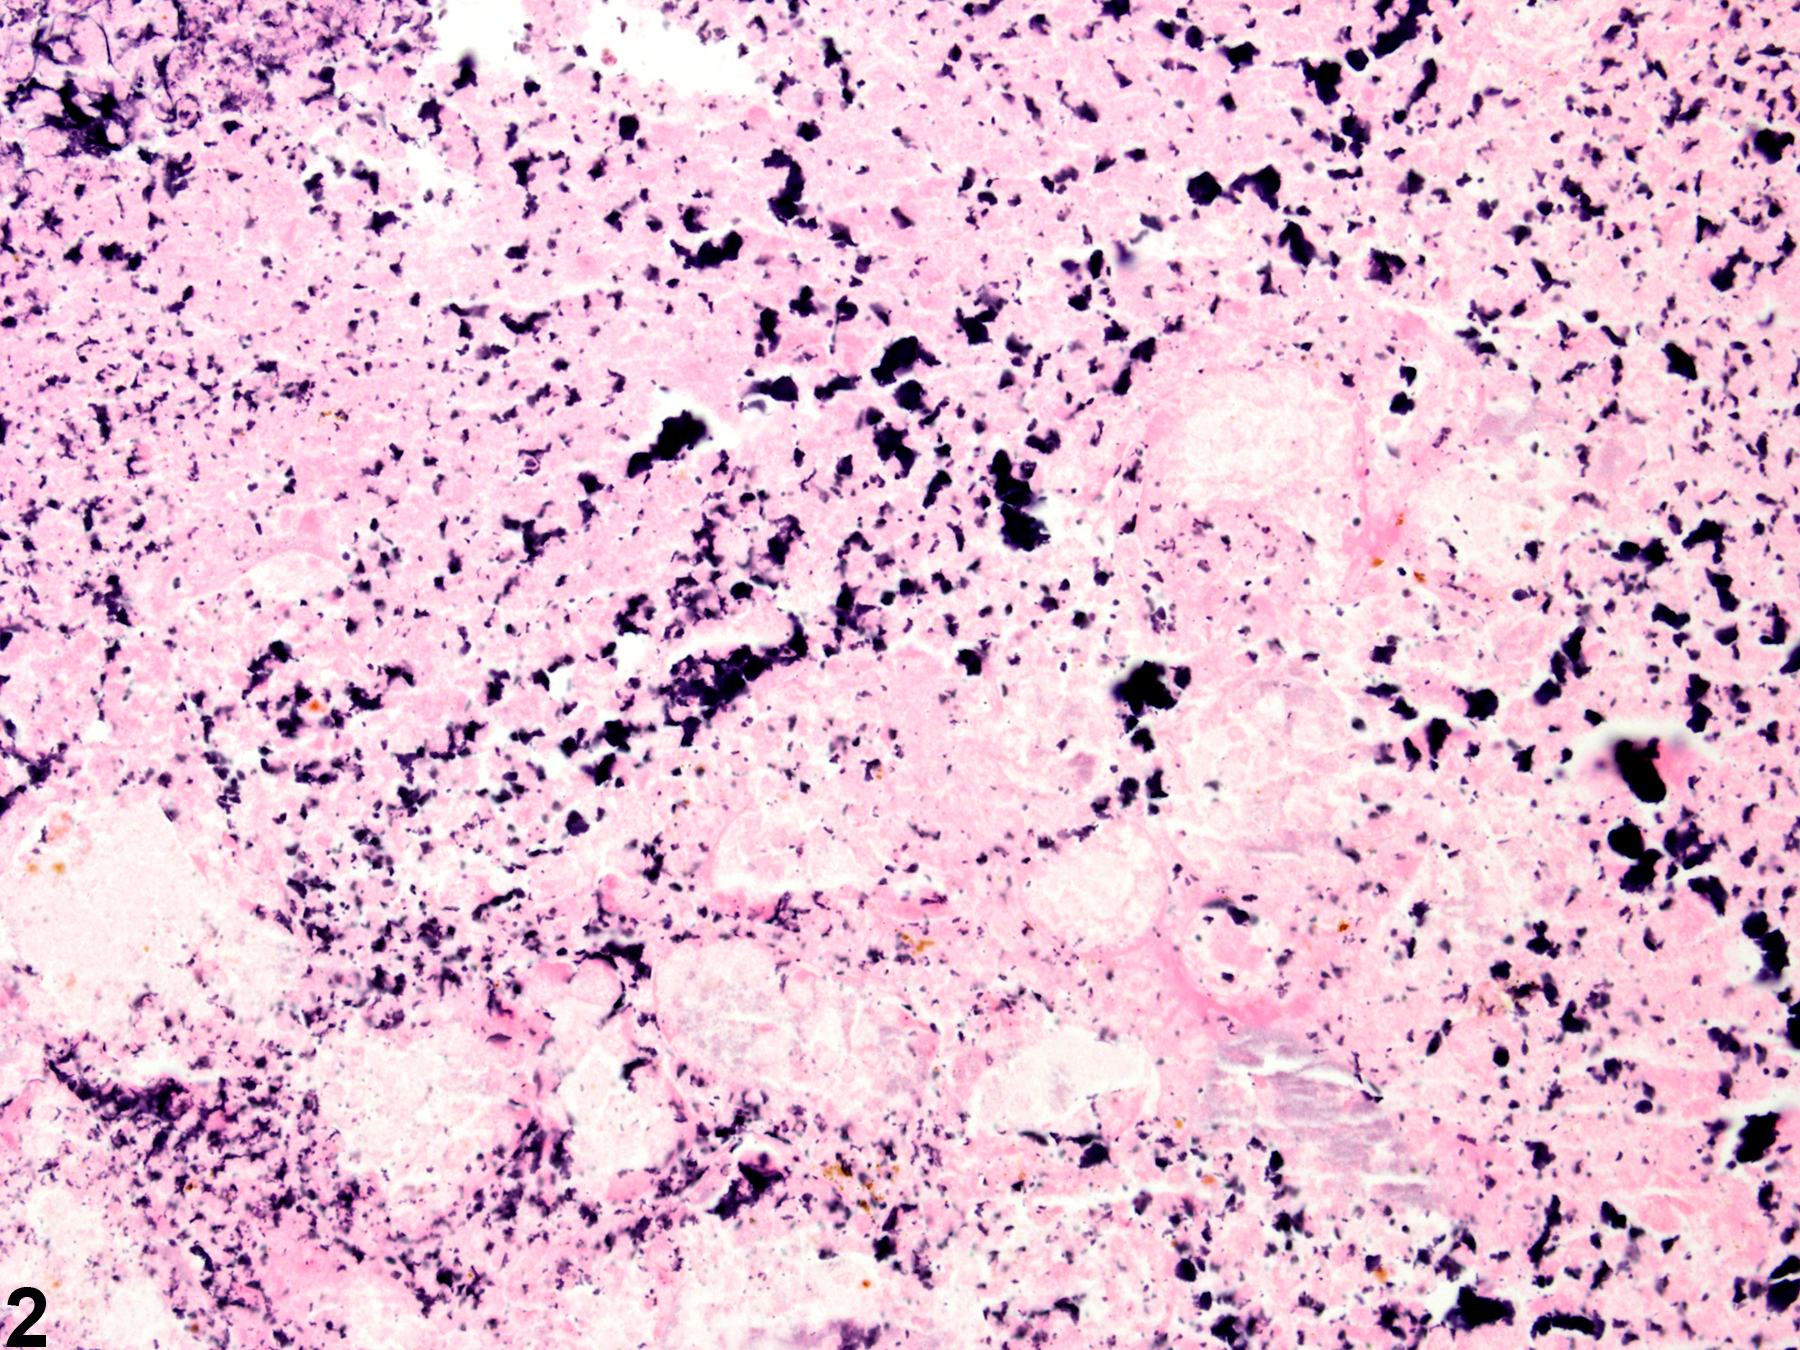 Image of necrosis in the Harderian gland from a male B6C3F1 mouse in a chronic study